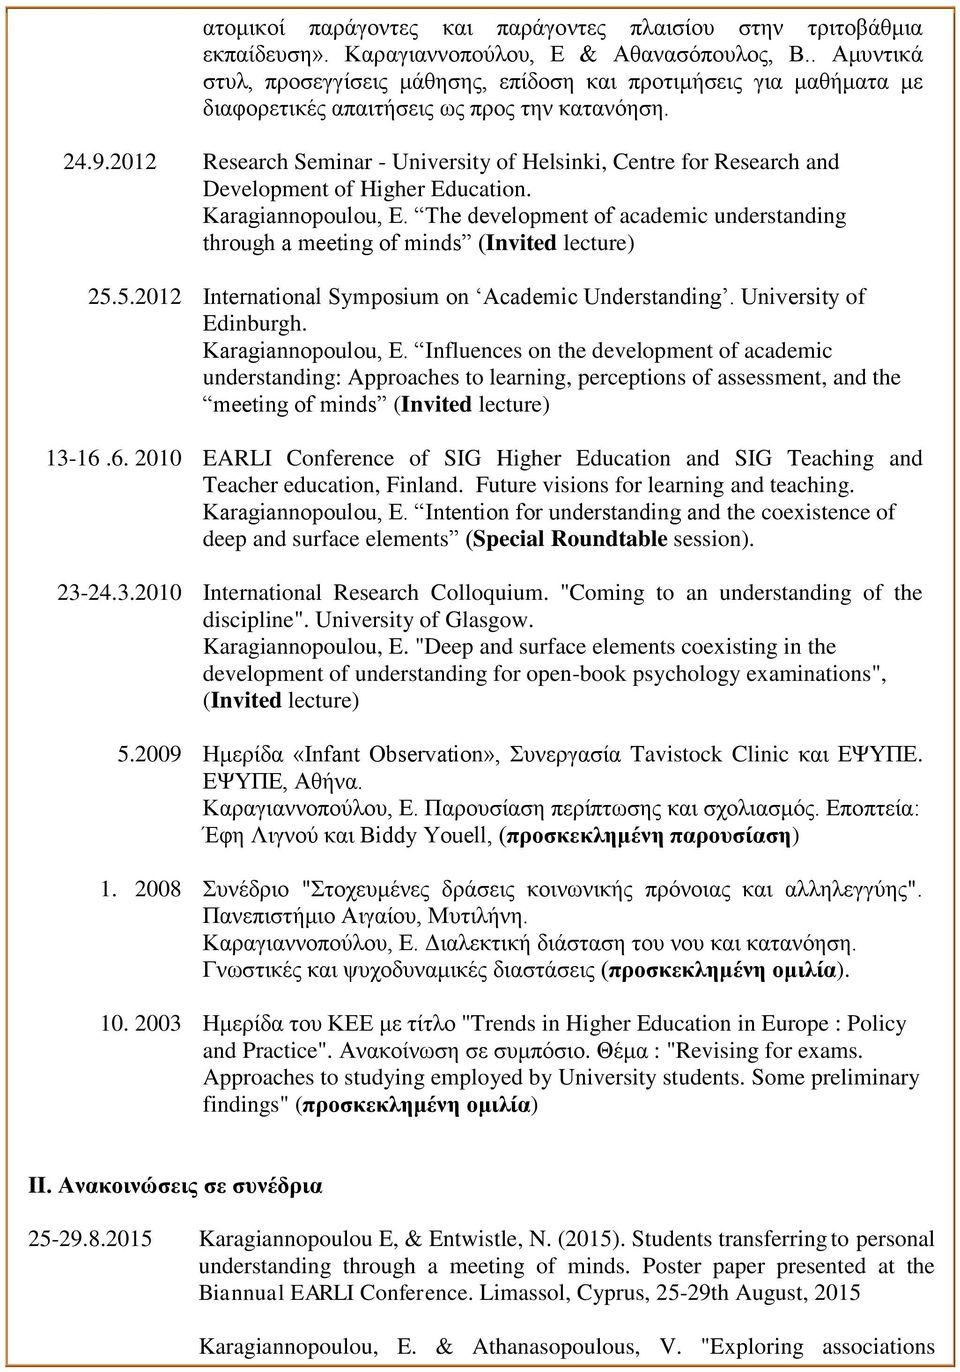 2003 Research Seminar - University of Helsinki, Centre for Research and Development of Higher Education. Karagiannopoulou, E.